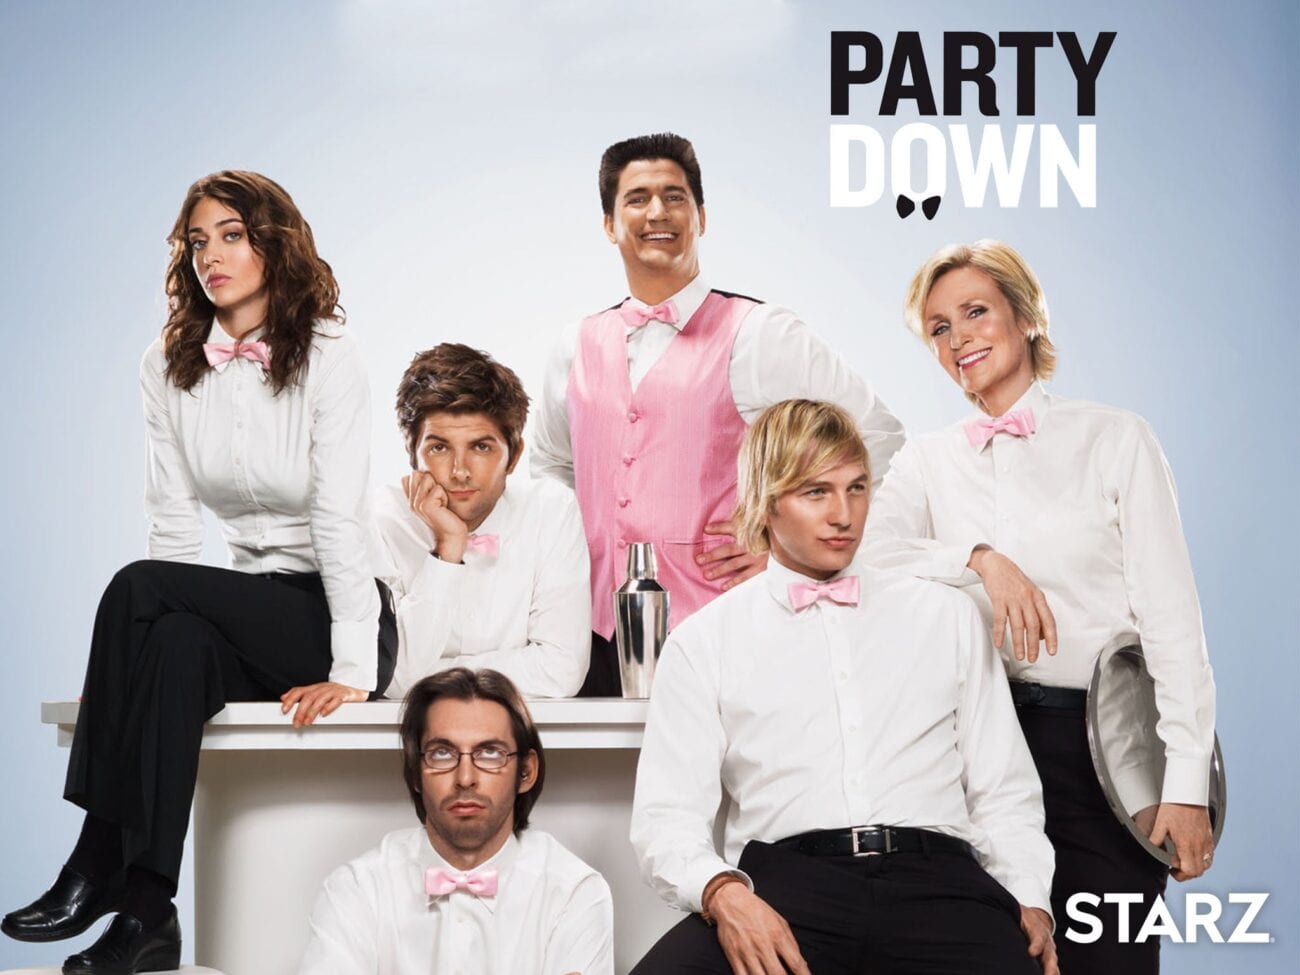 'Party Down' is back! The revival is officially a "Ron Donald Do" at Starz and the original cast and producers are all coming back. Get your bow tie ready!